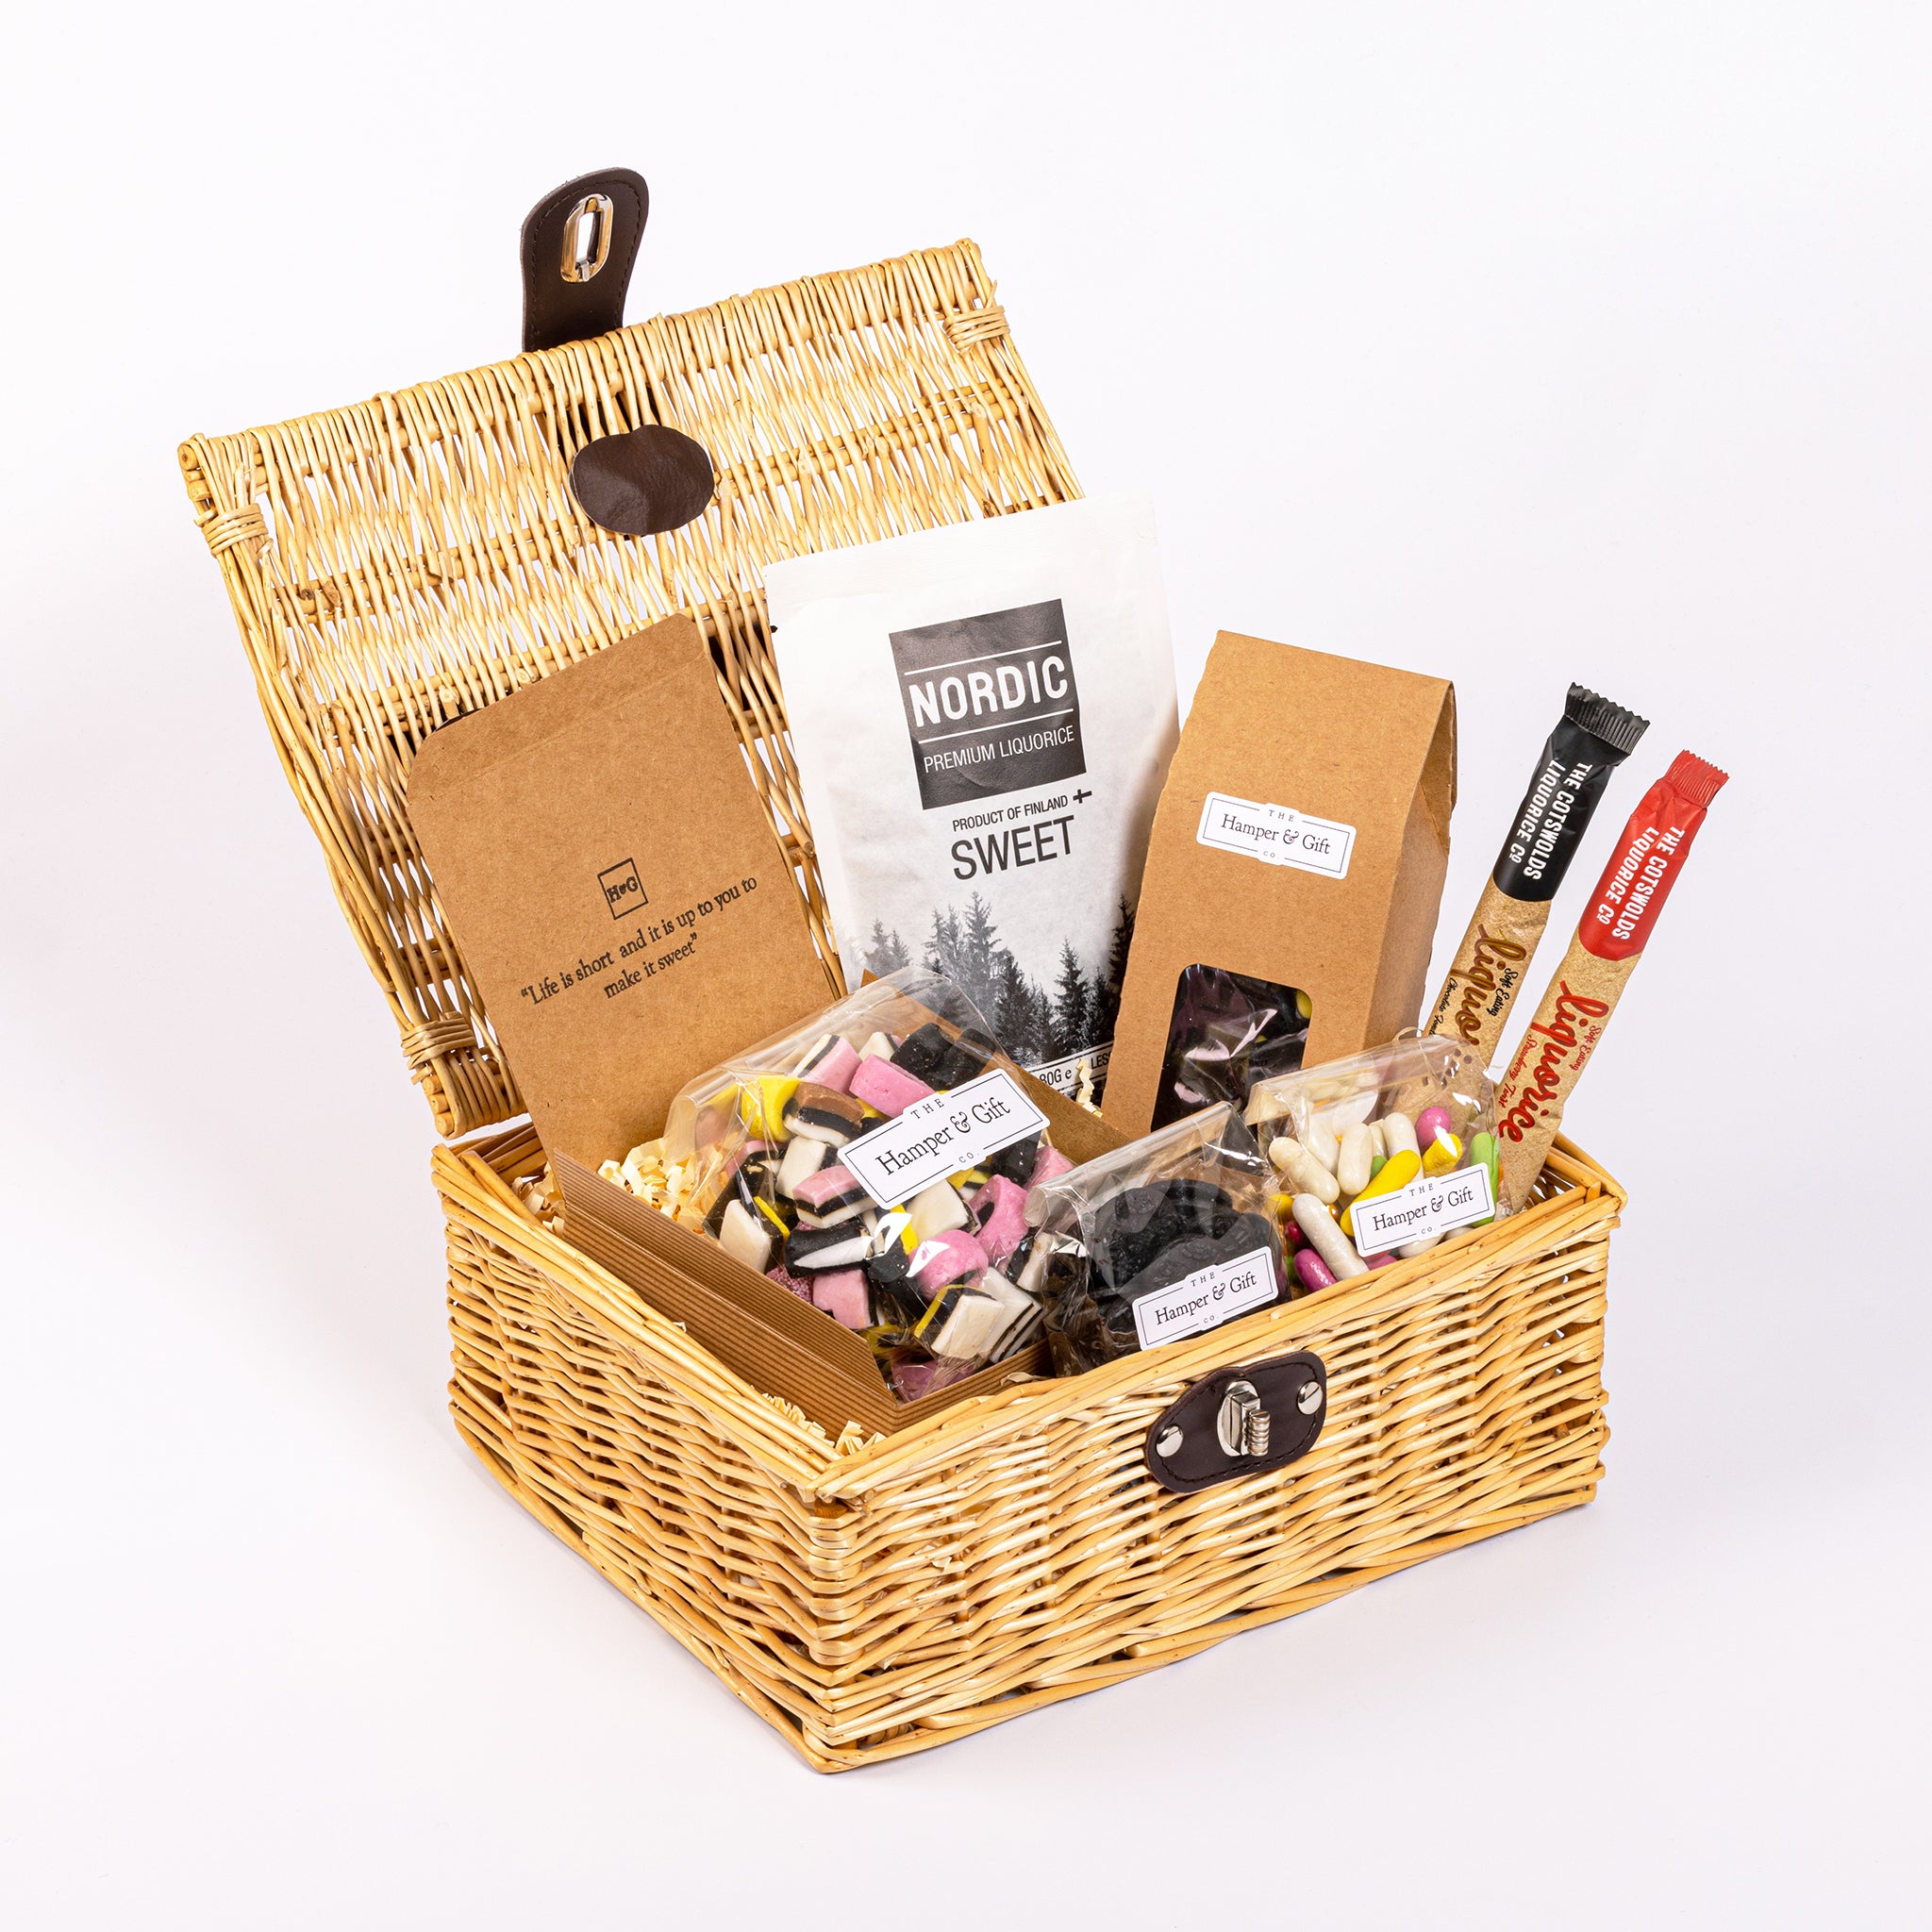 Corporate gifting | Corporate gifts, Gift hampers, Client gifts